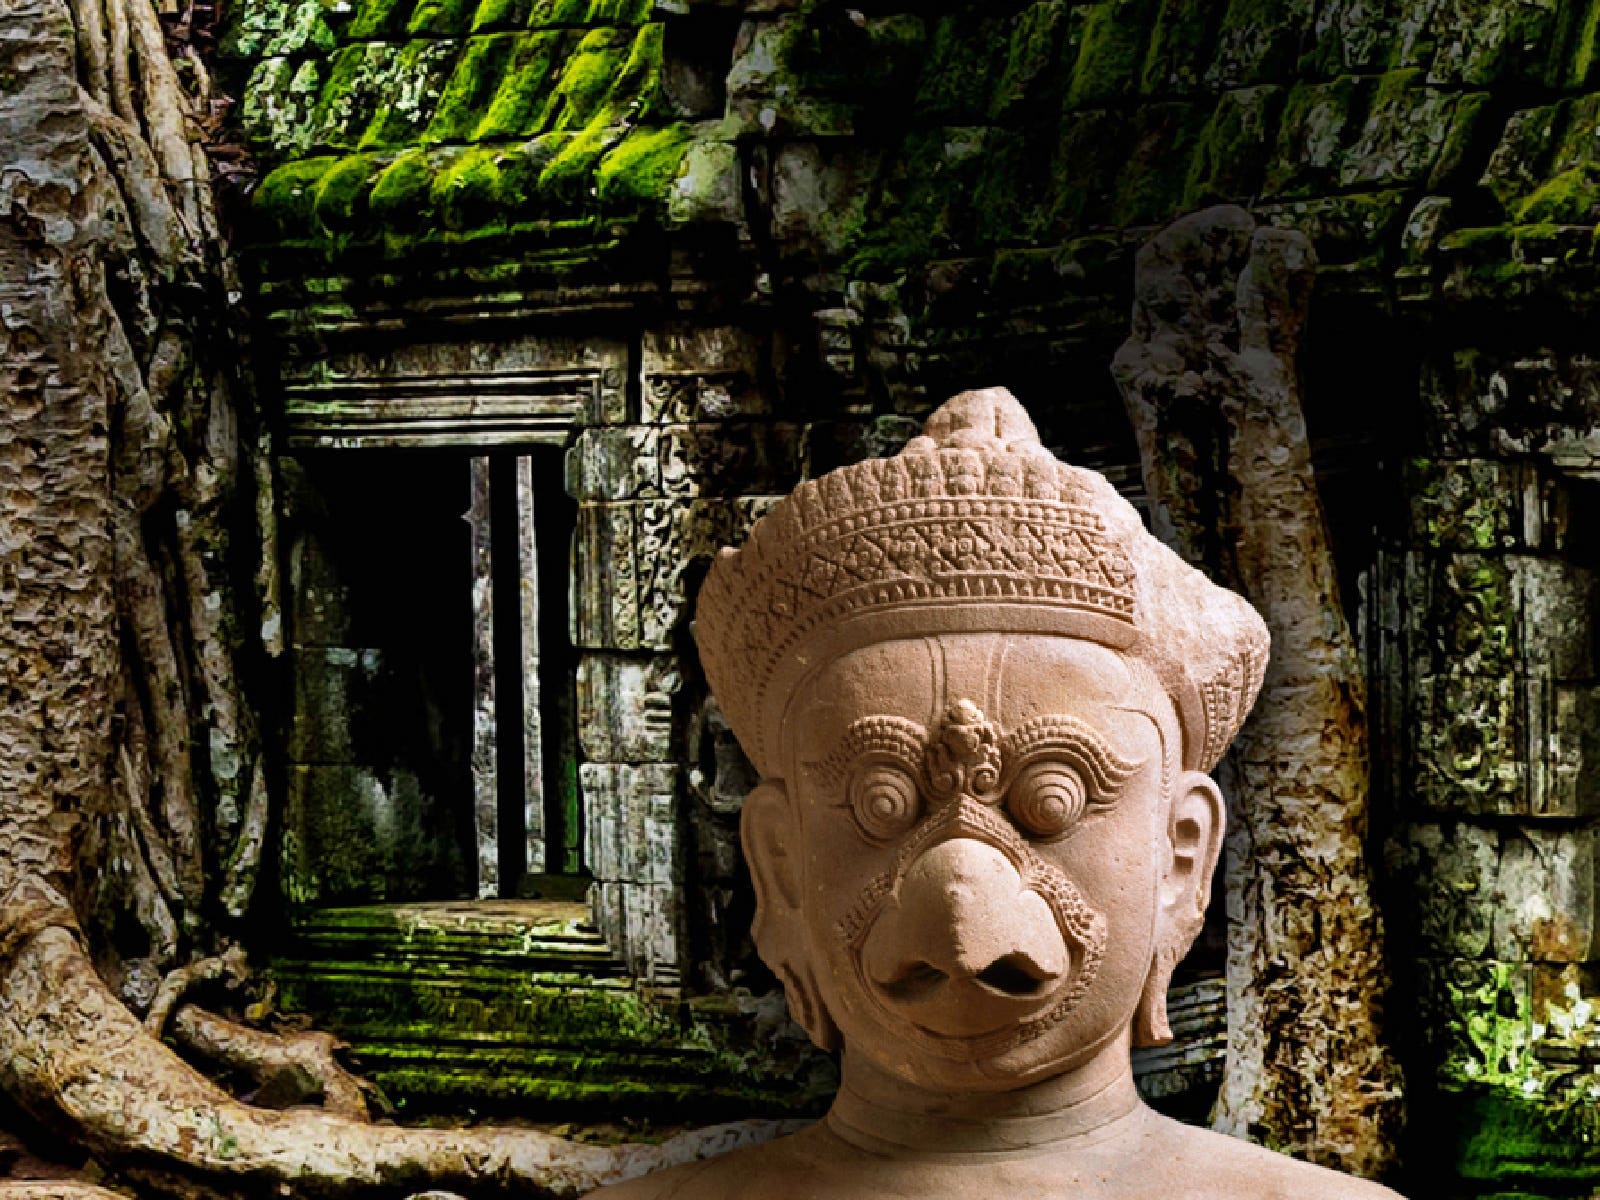 Main image for event titled Angkor: The Lost Empire of Cambodia